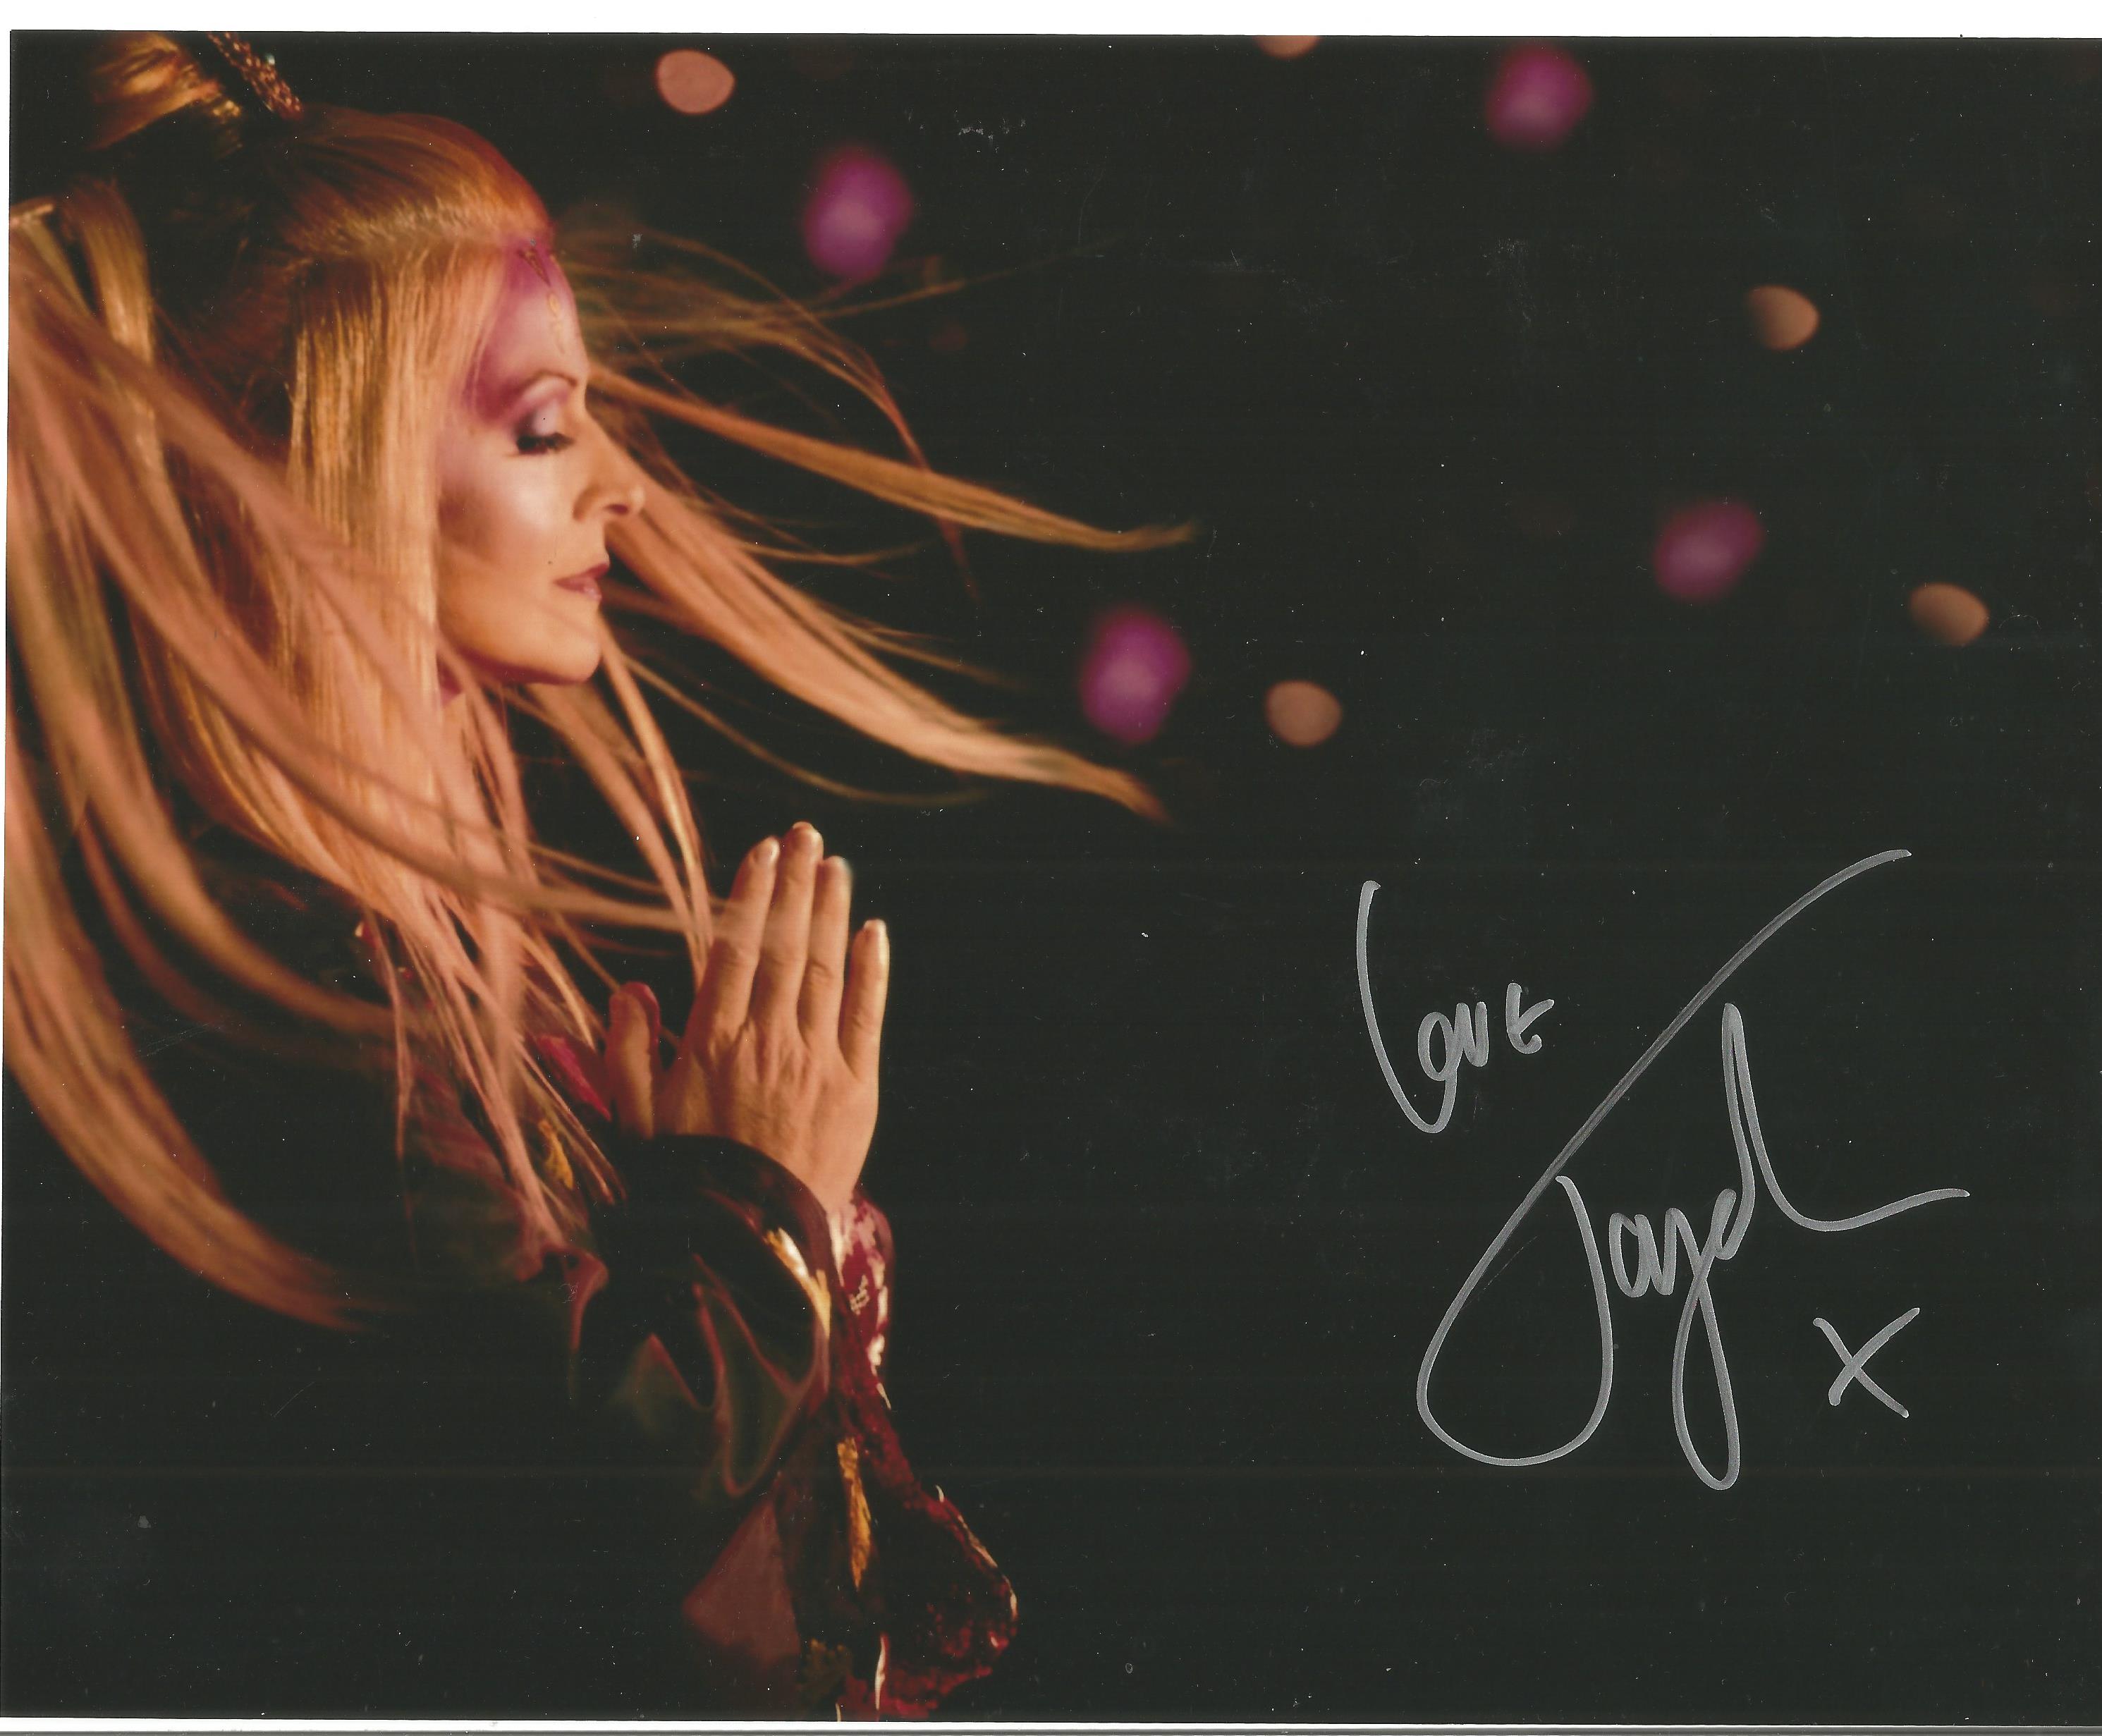 Toyah Punk Queen signed 10 x 8 inch colour photo. Good condition. All autographs come with a